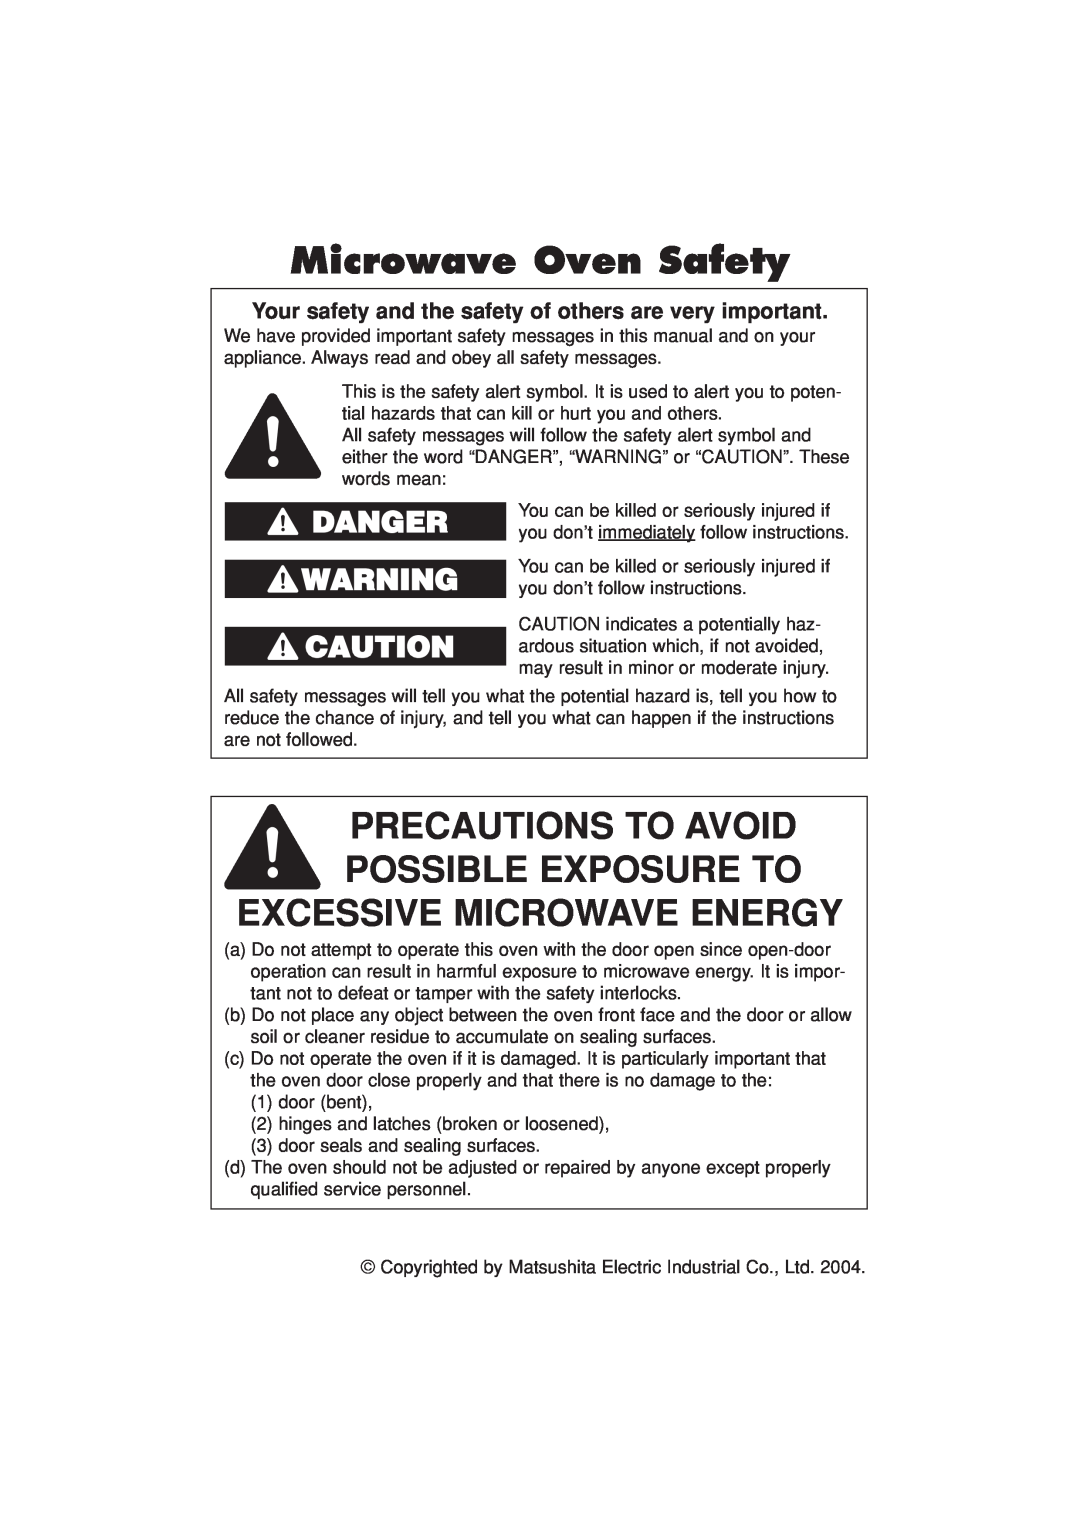 Panasonic NN-H644 Excessive Microwave Energy, Precautions To Avoid Possible Exposure To, Danger, Microwave Oven Safety 